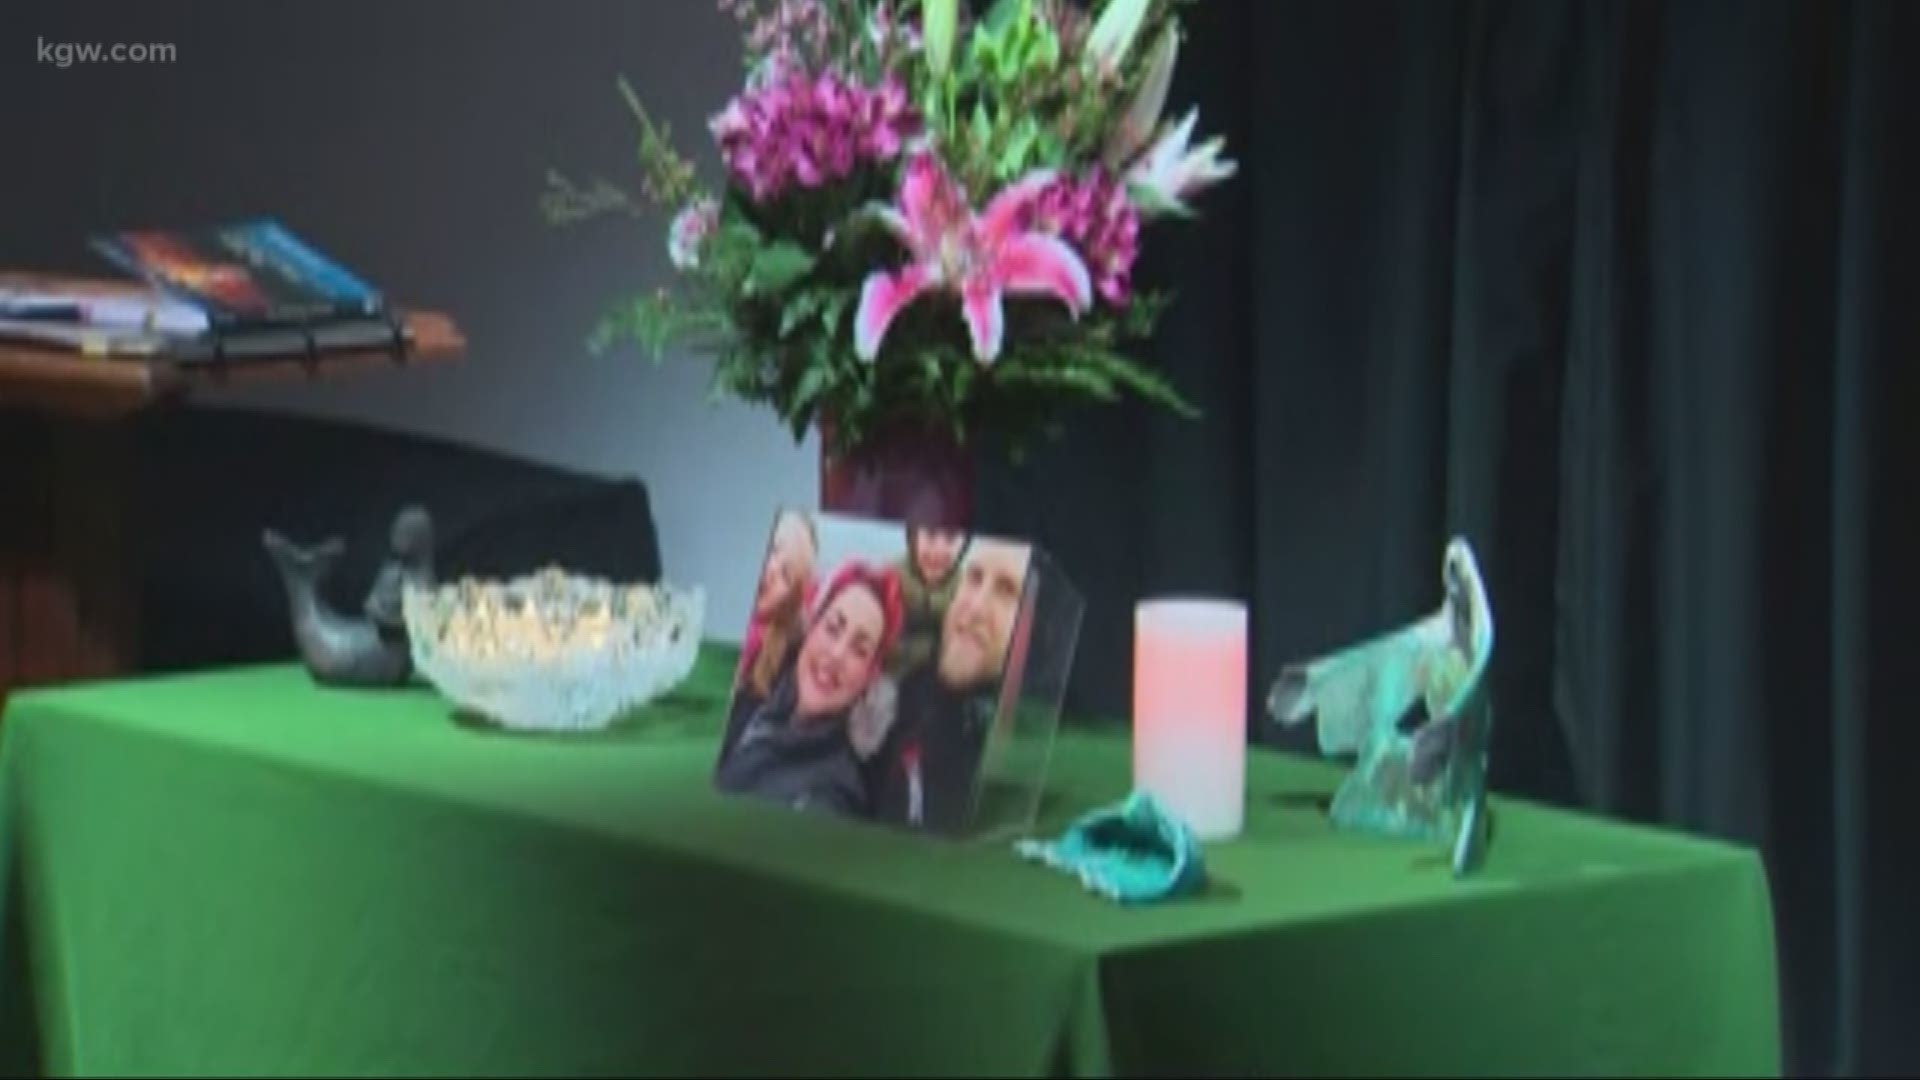 A community in mourning. A look inside the vigil for a family swept out to sea last weekend on the Oregon Coast.